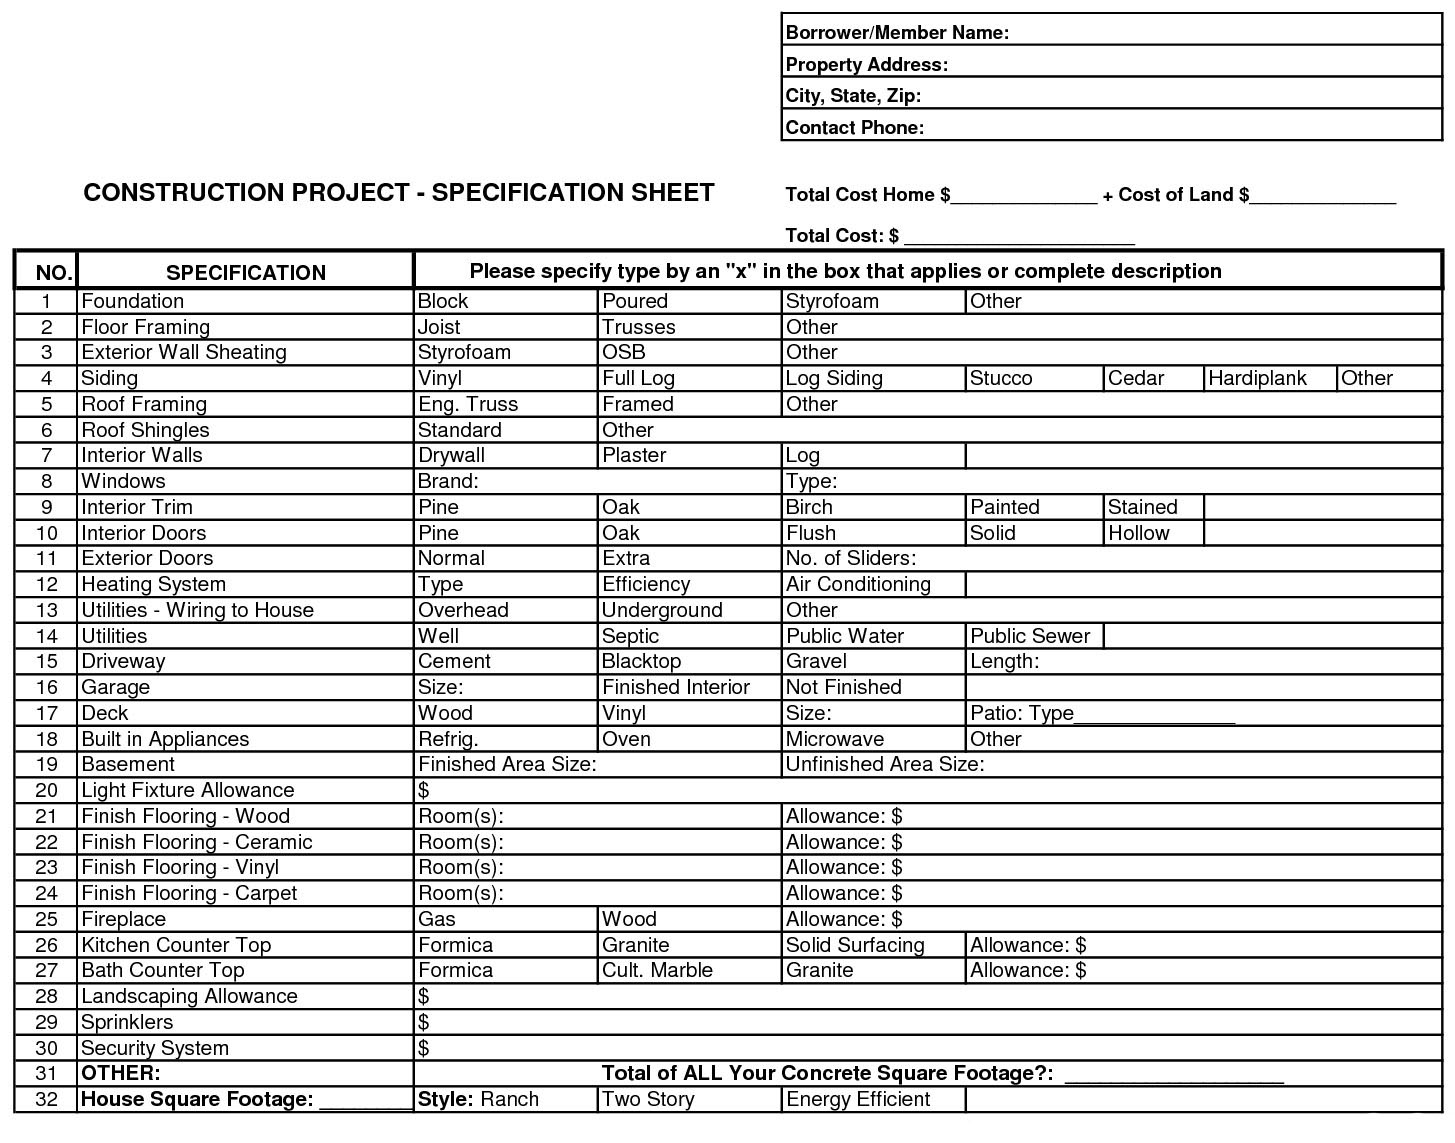 new-home-construction-project-specification-sheet-template-download